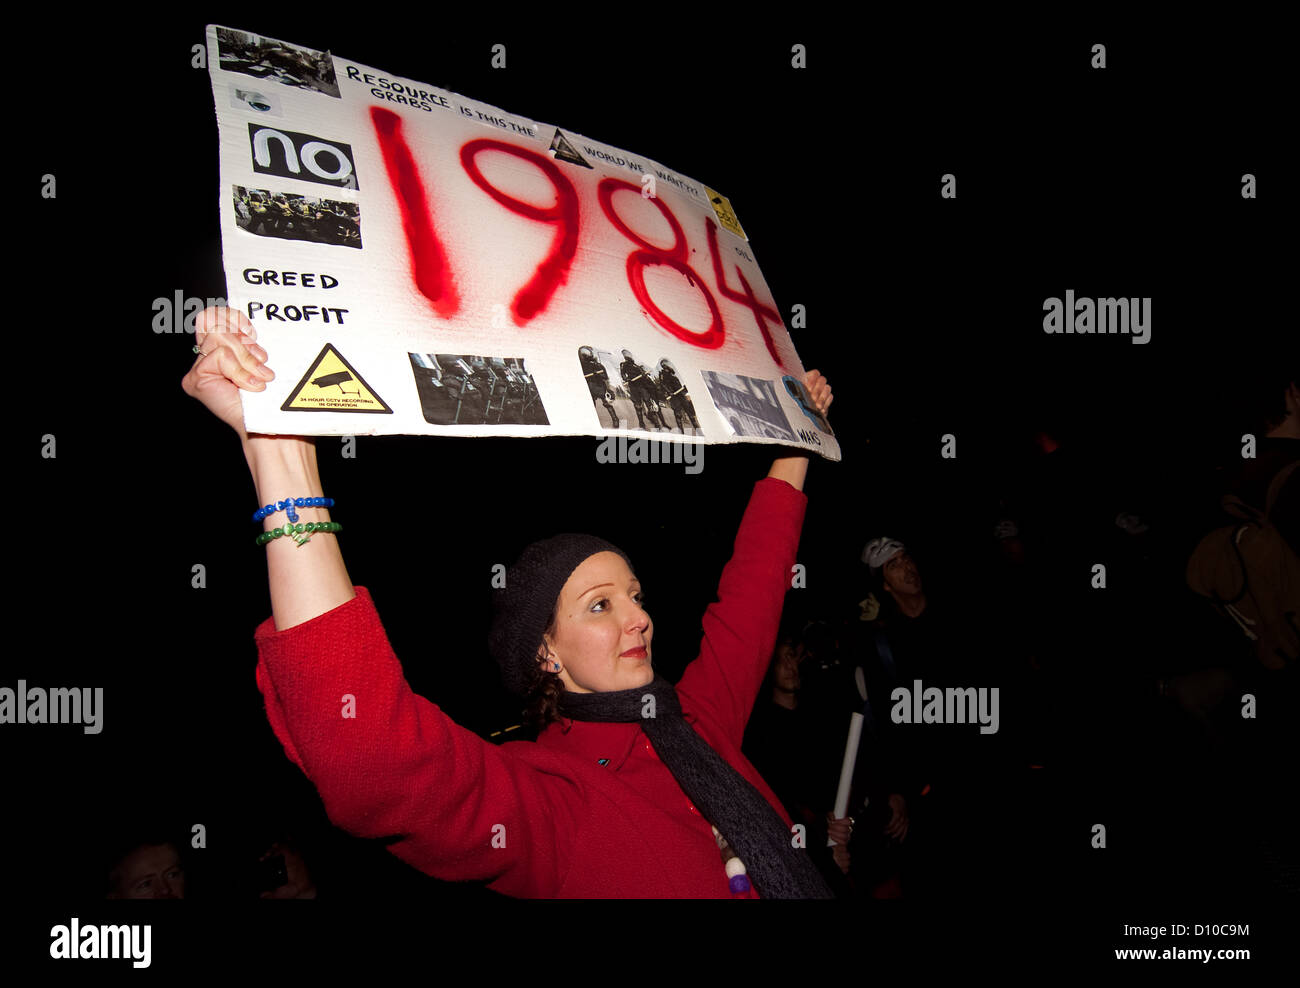 A protester holds a placard during the operation vendetta protest meeting point at Trafalgar square. Stock Photo